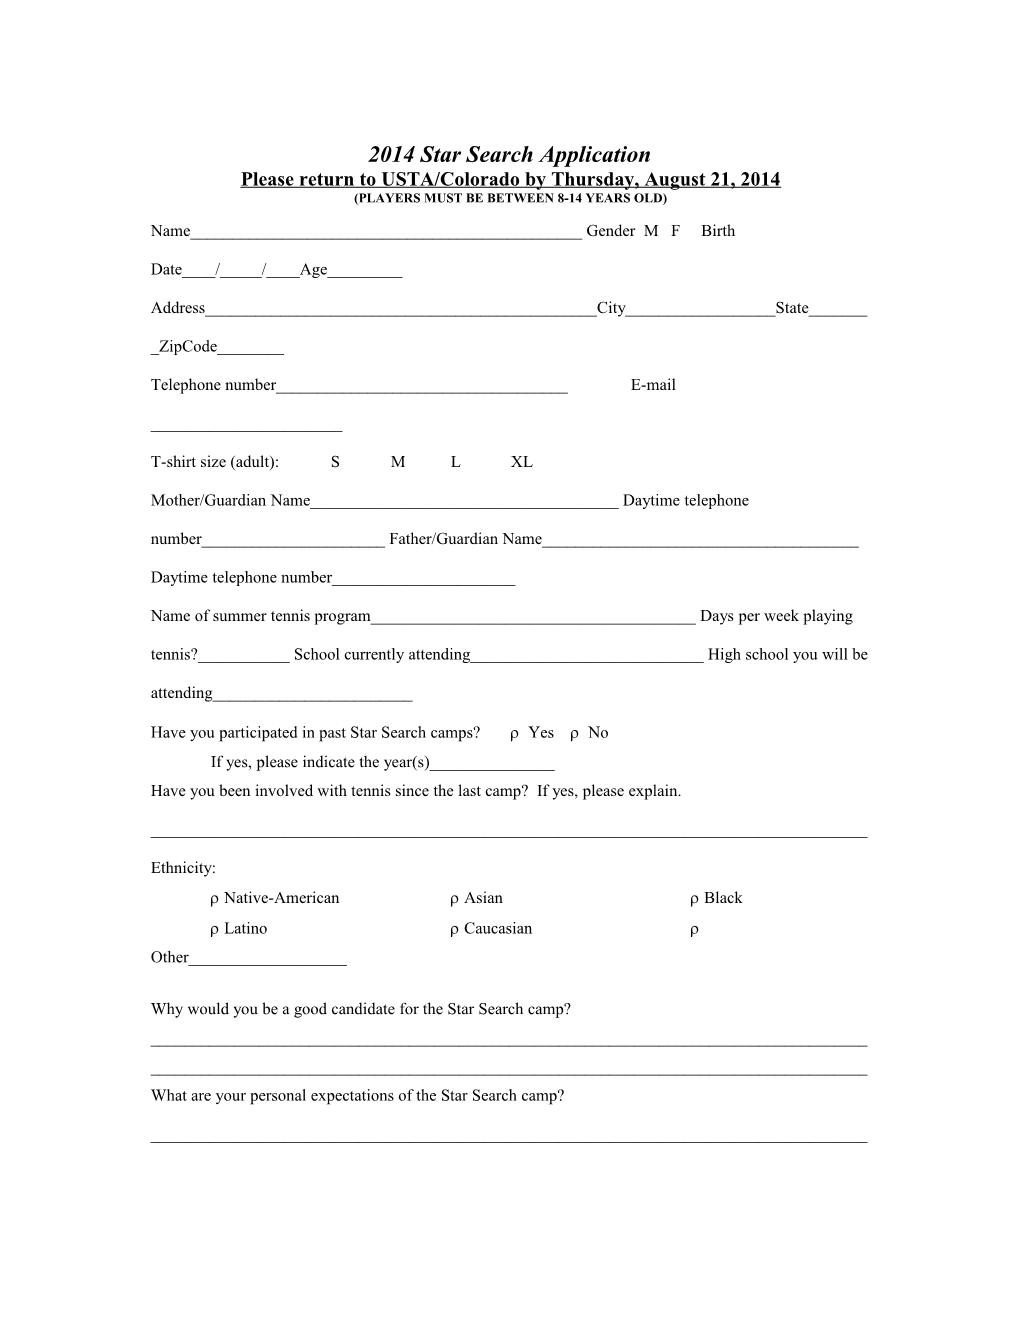 2007 Star Search Application